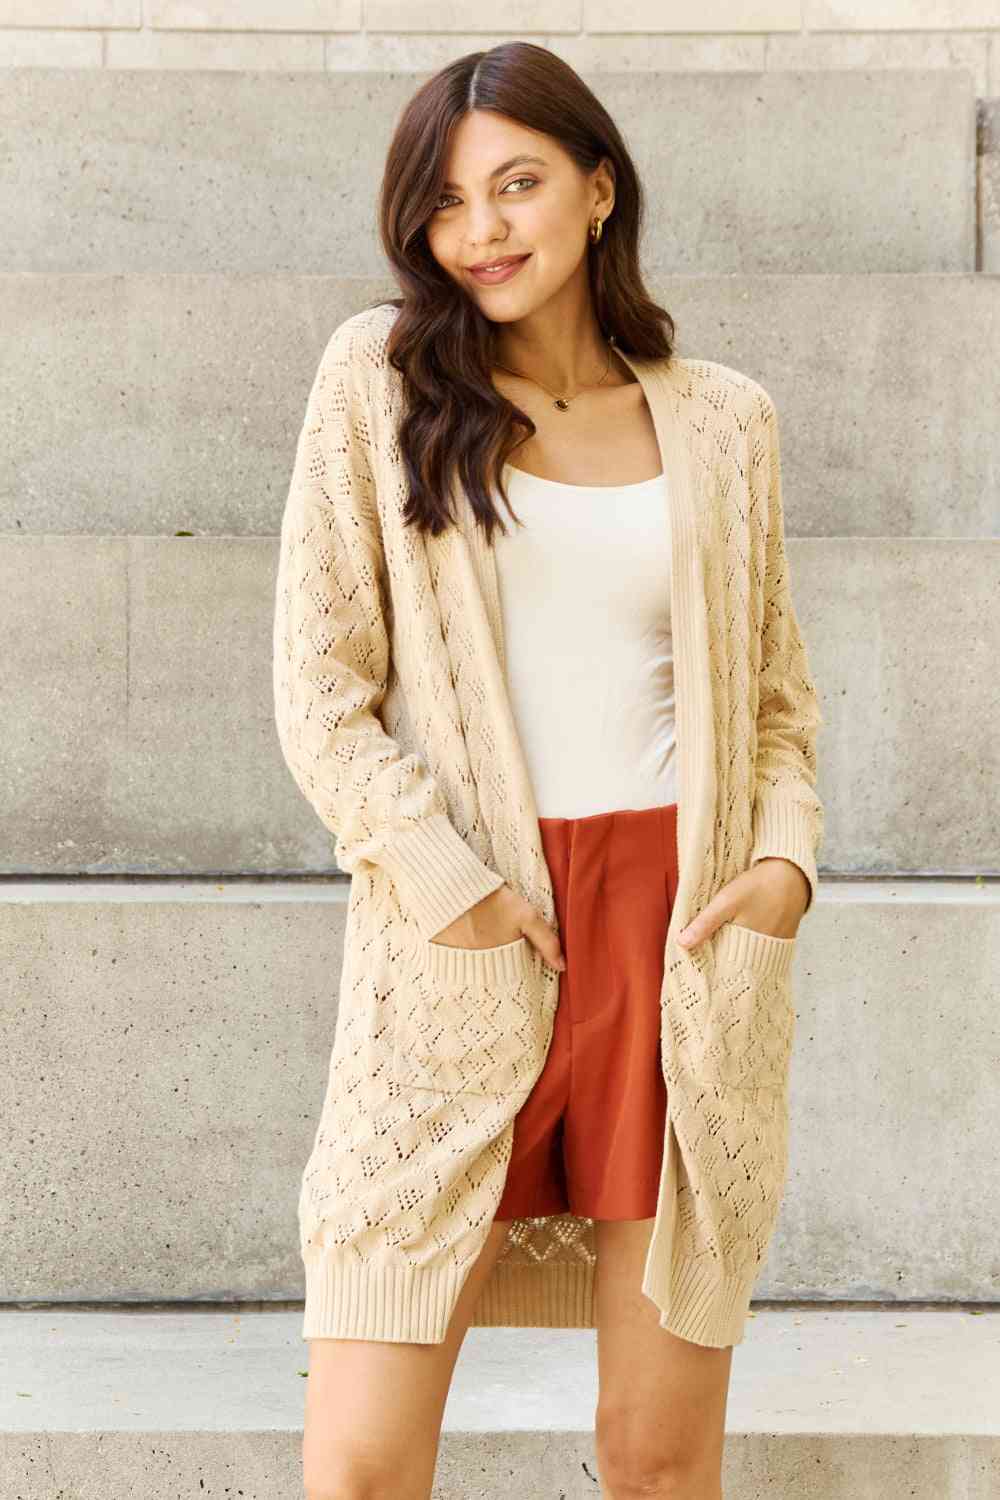 Breezy Days Full Size Open Front Sweater Cardigan - Sweaters - Shirts & Tops - 7 - 2024